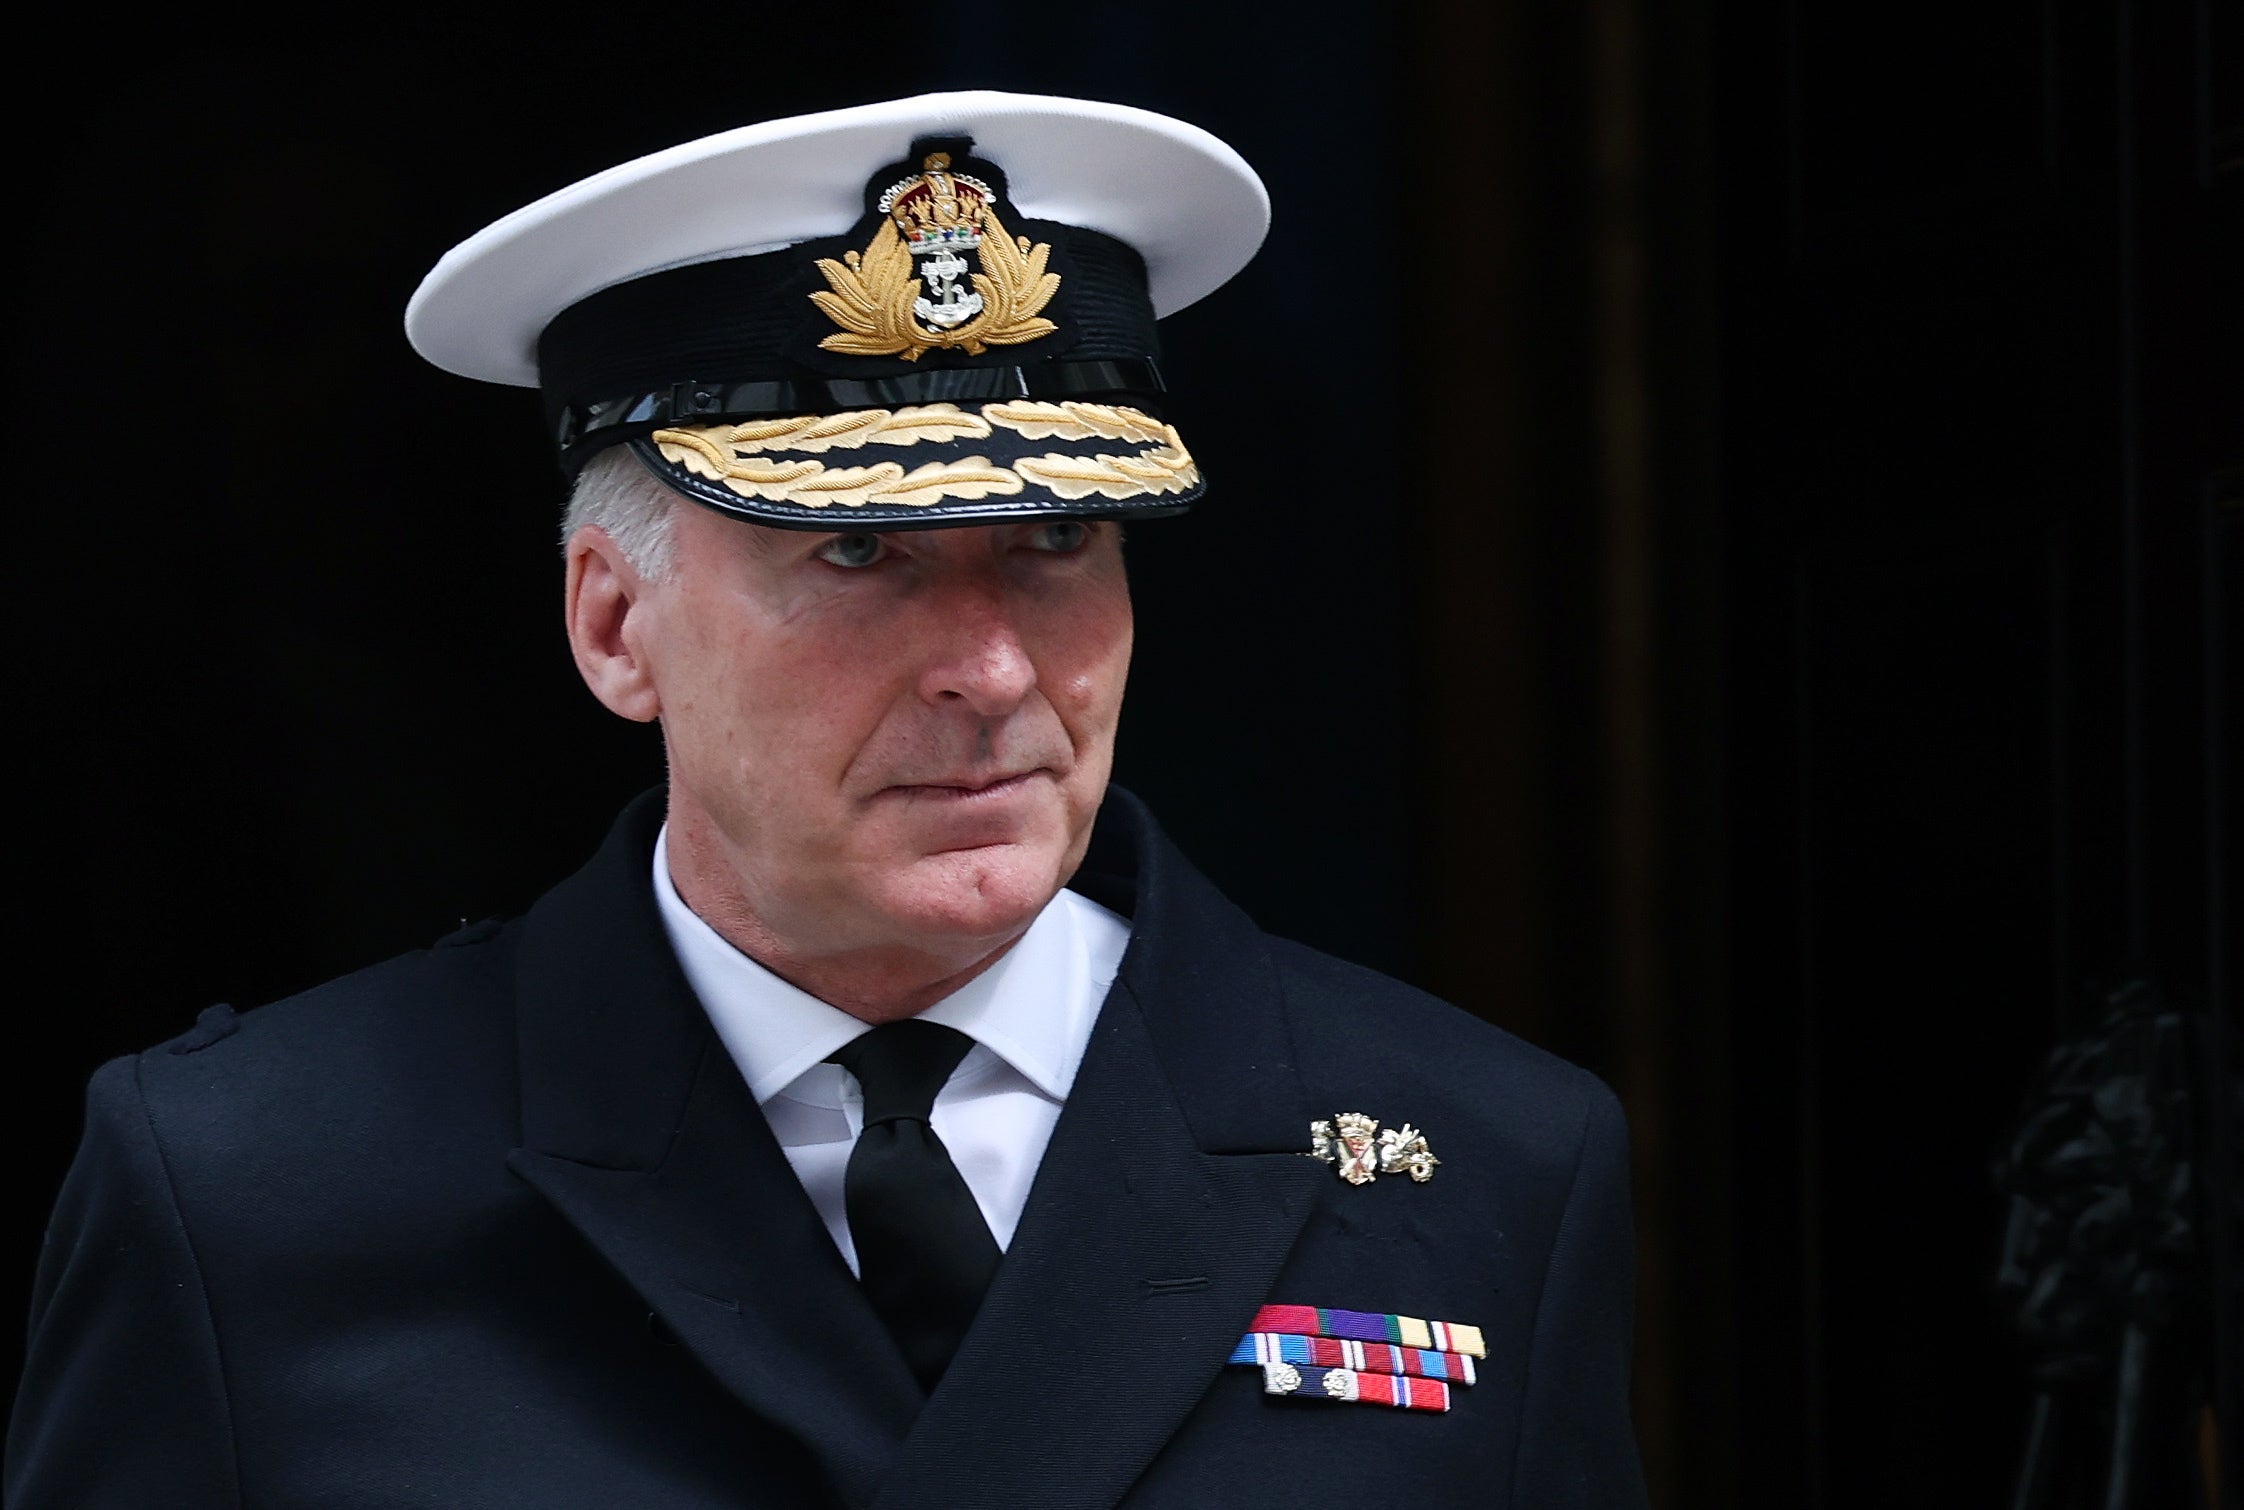 Chief of the defence staff Tony Radakin leaves 10 Downing Street yesterday